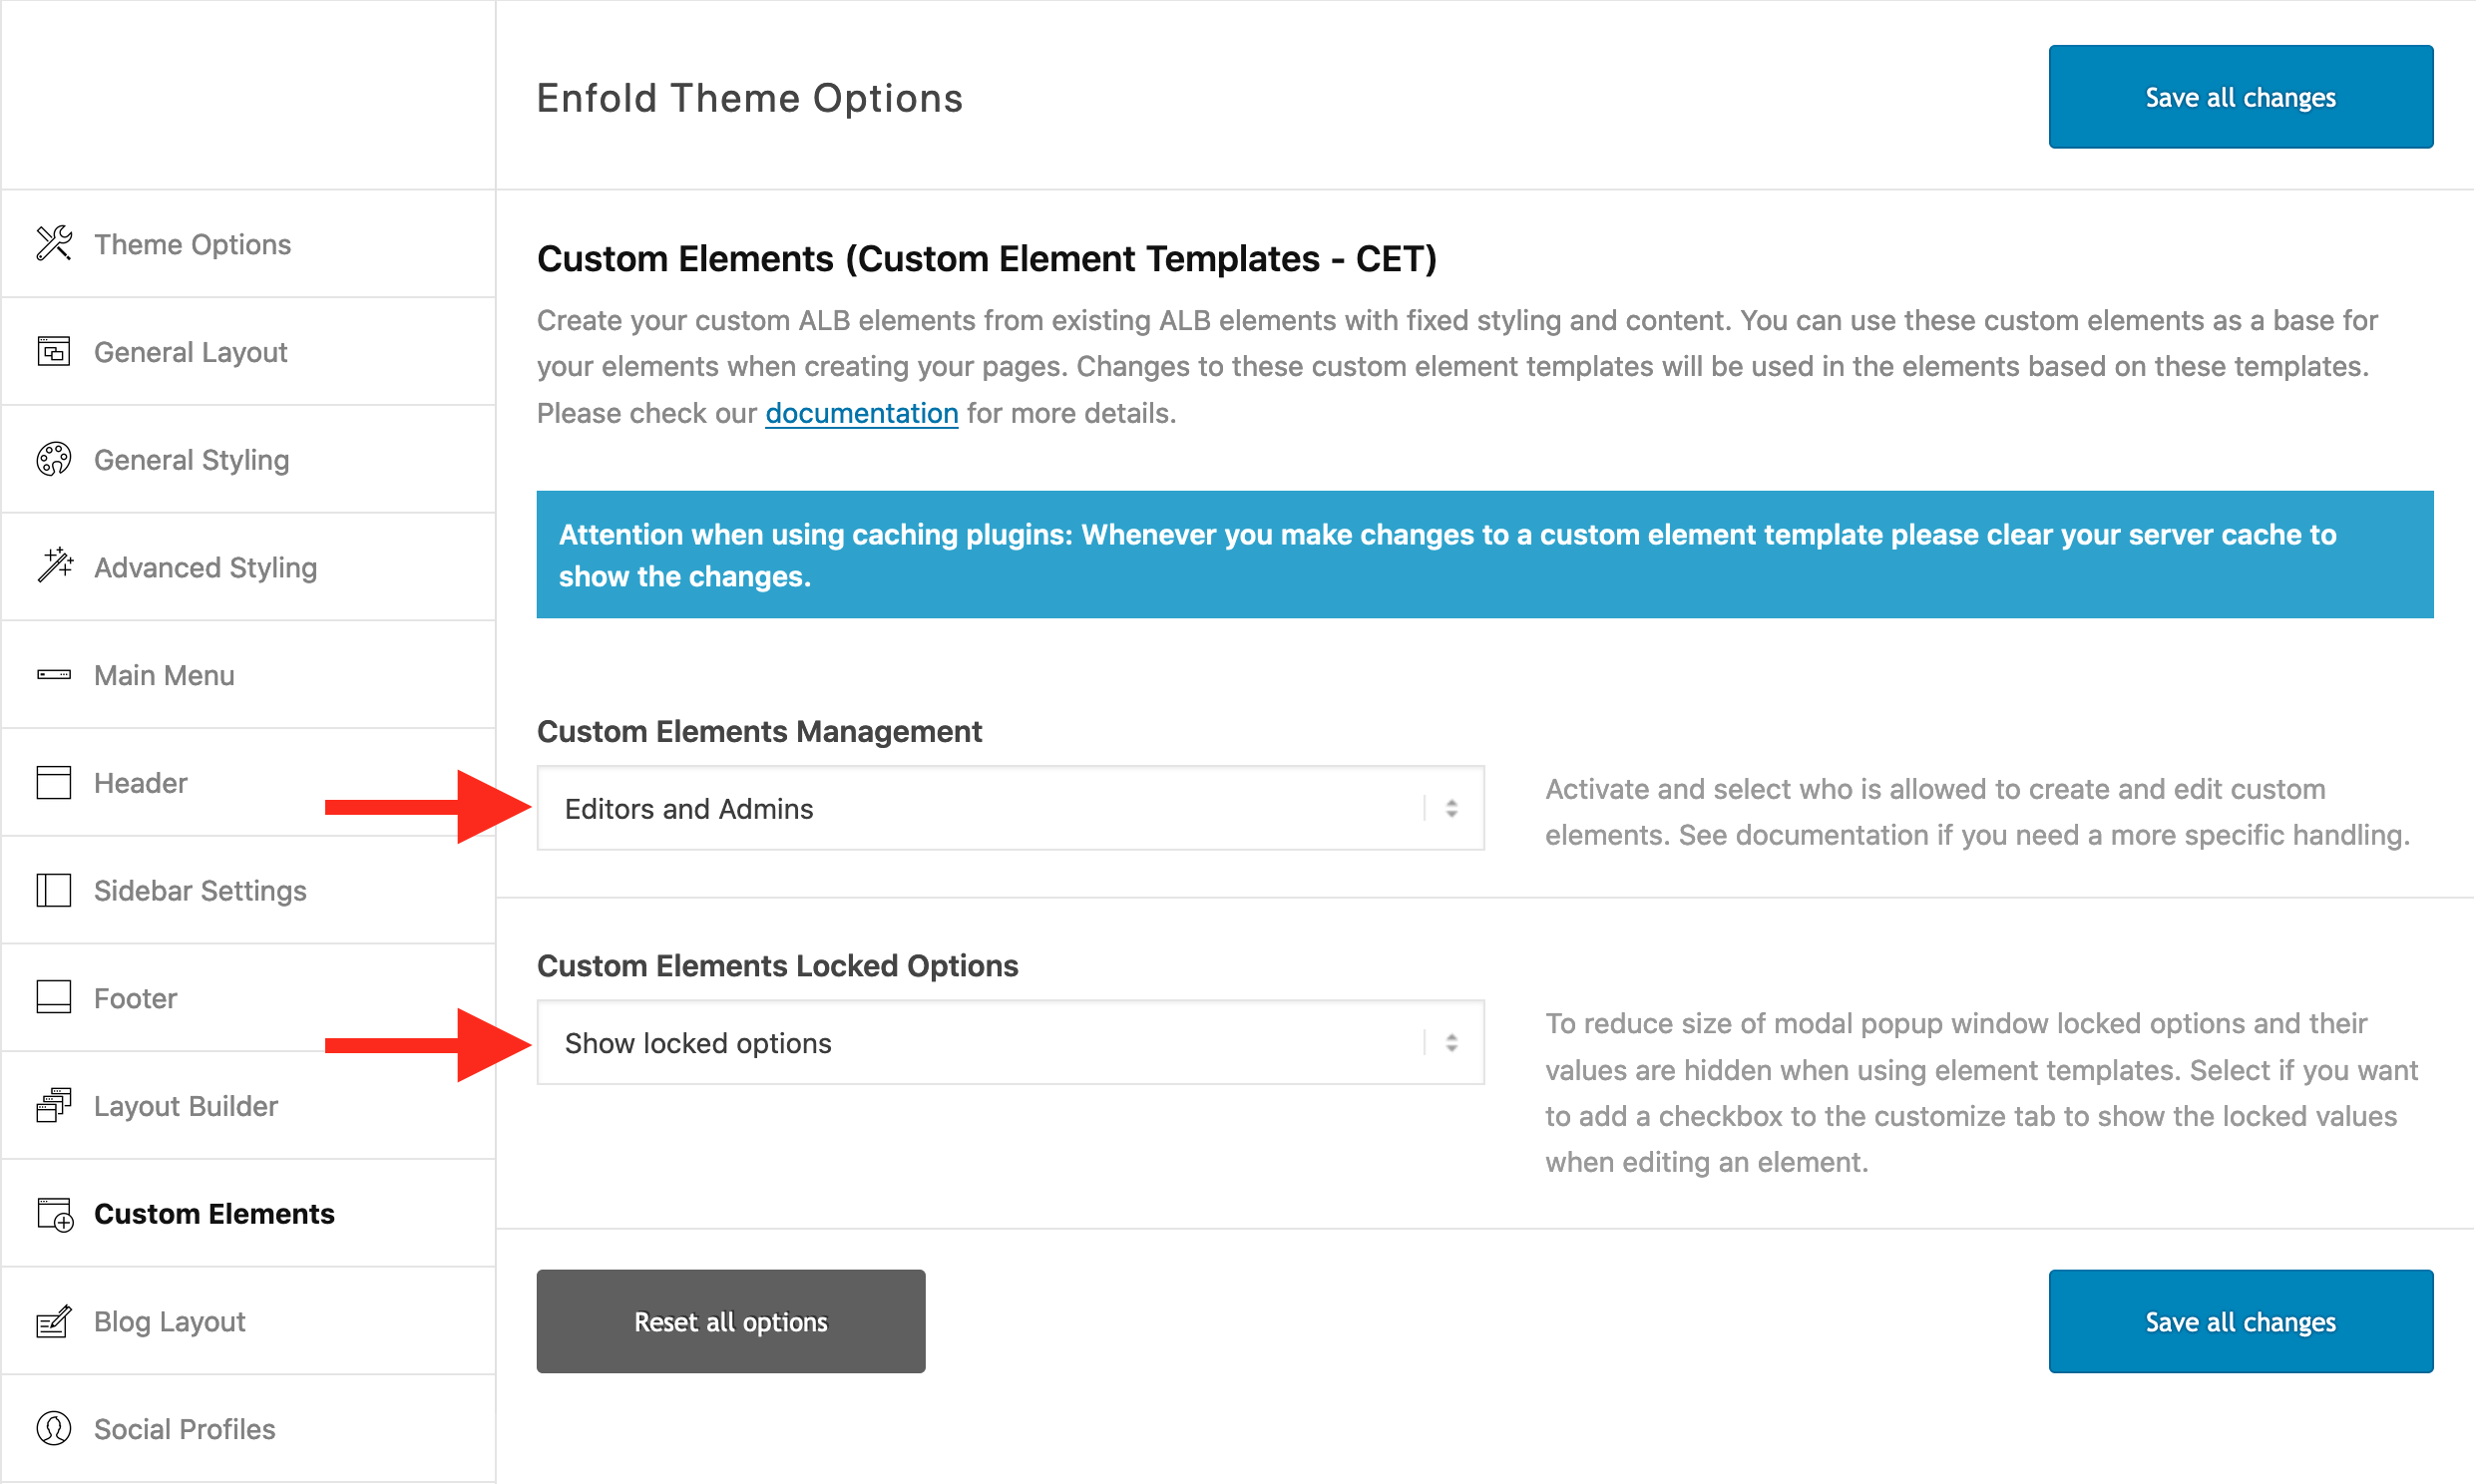 How to add template colors to custom block options in WordPress